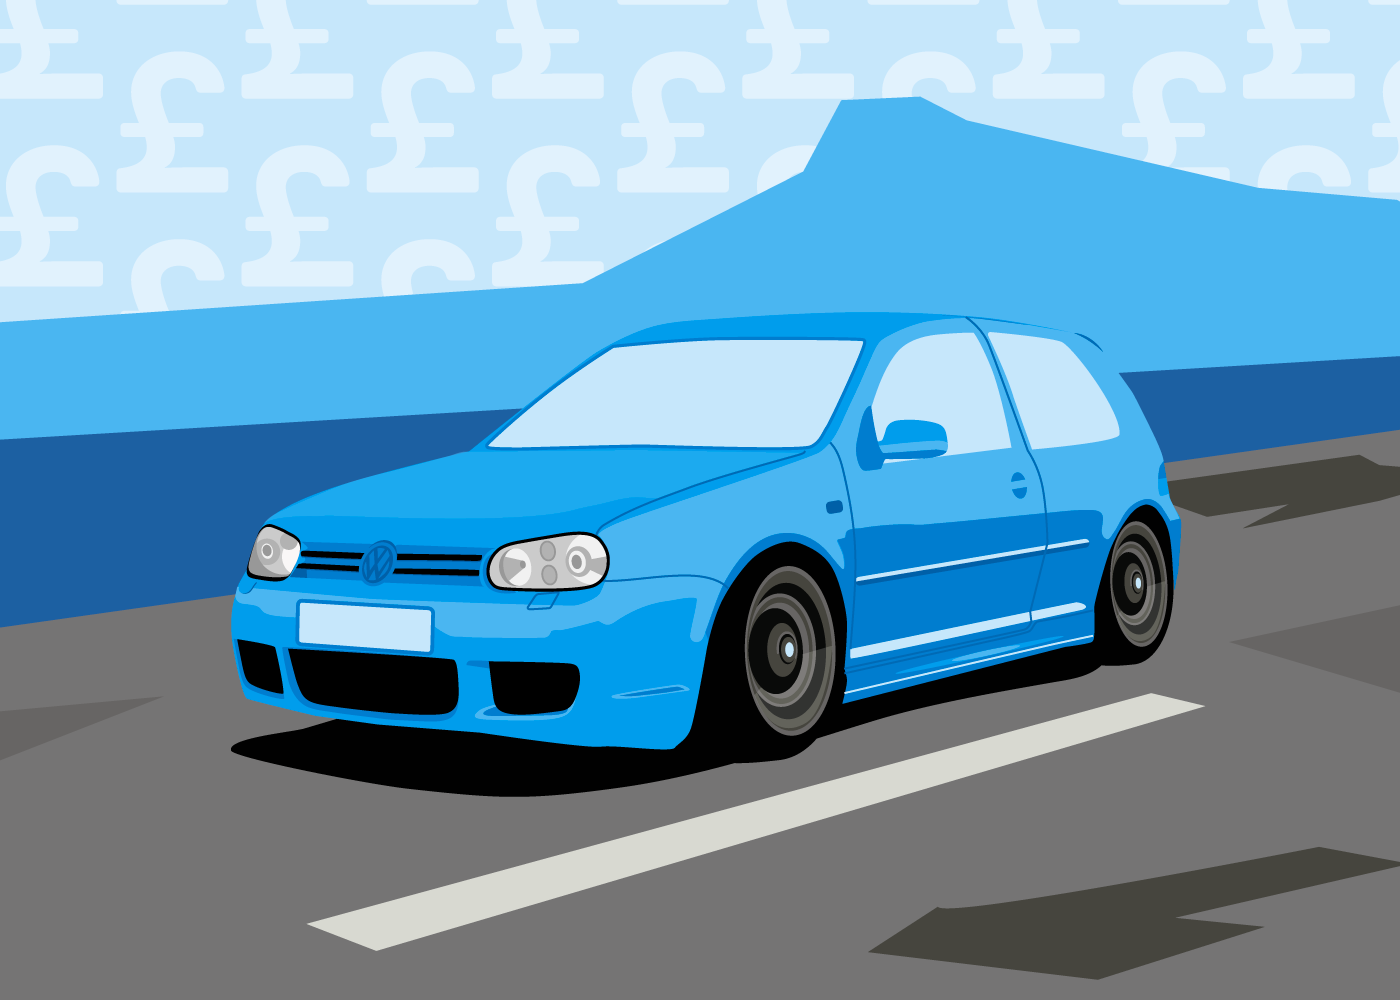 Illustration of modern classic car with pound signs in background